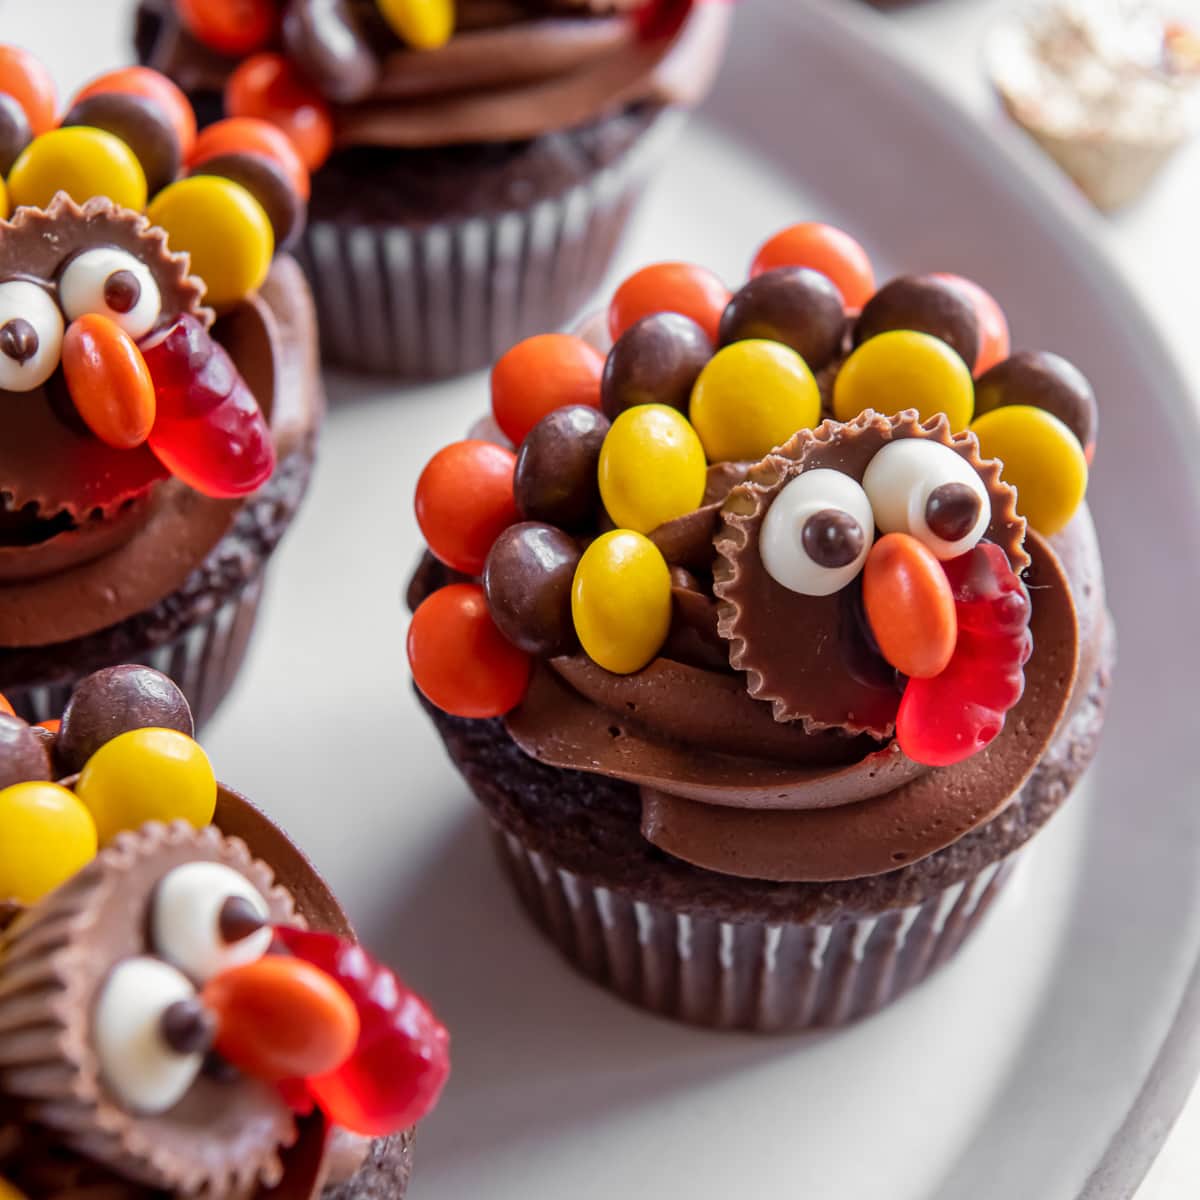 chocolate cupcake decorated with Reese's candy to look like a turkey.